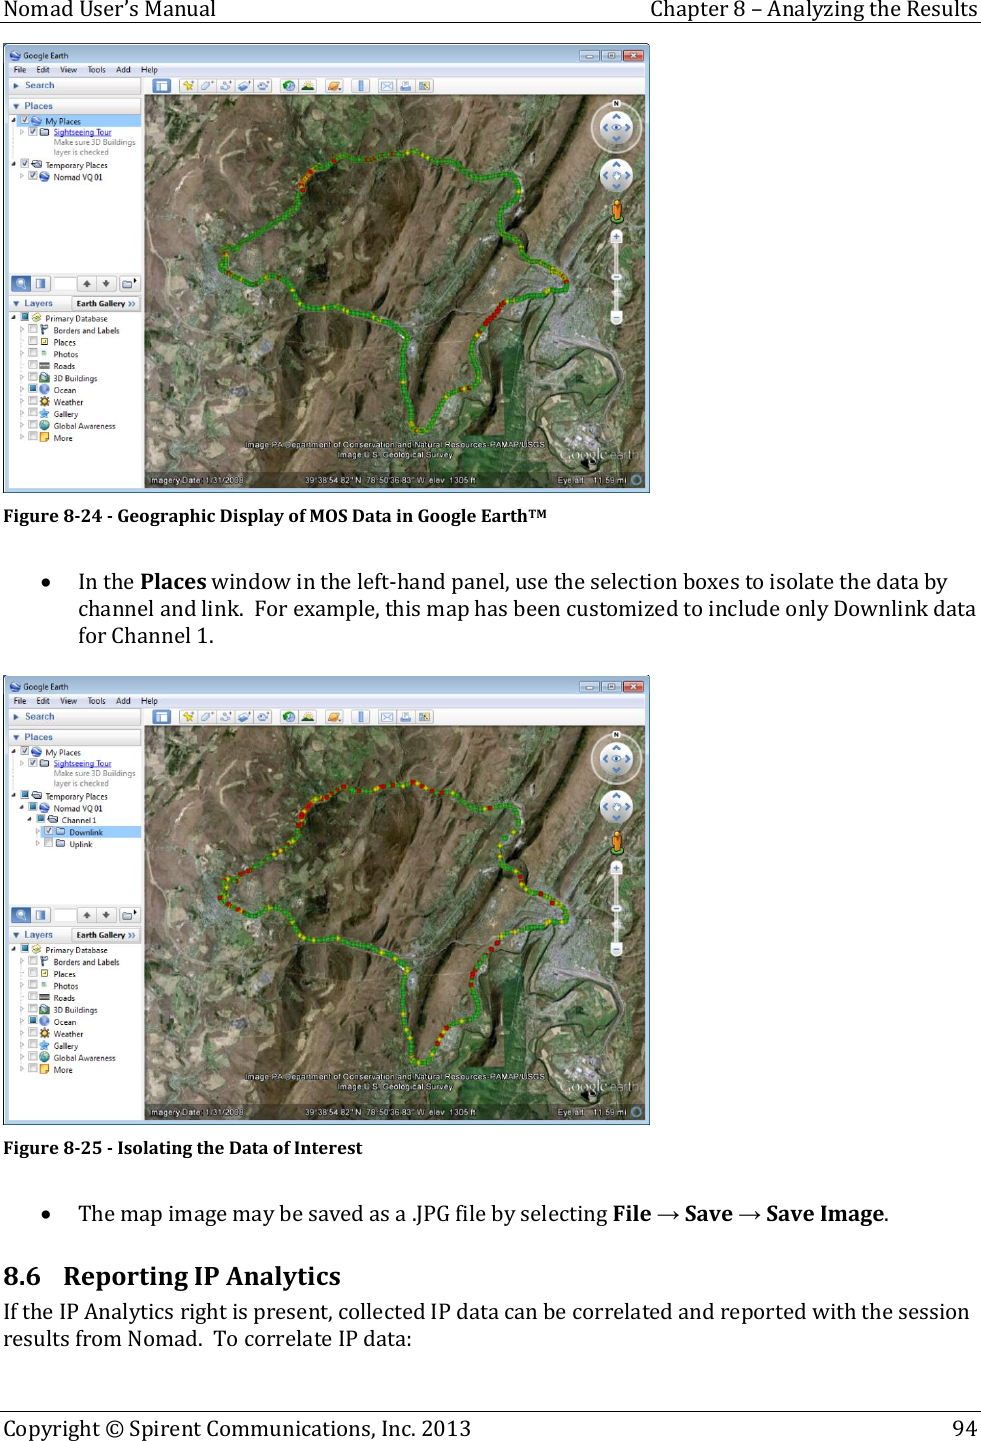  Nomad User’s Manual  Chapter 8 – Analyzing the Results Copyright © Spirent Communications, Inc. 2013    94   Figure 8-24 - Geographic Display of MOS Data in Google EarthTM   In the Places window in the left-hand panel, use the selection boxes to isolate the data by channel and link.  For example, this map has been customized to include only Downlink data for Channel 1.   Figure 8-25 - Isolating the Data of Interest   The map image may be saved as a .JPG file by selecting File → Save → Save Image. 8.6 Reporting IP Analytics If the IP Analytics right is present, collected IP data can be correlated and reported with the session results from Nomad.  To correlate IP data: 